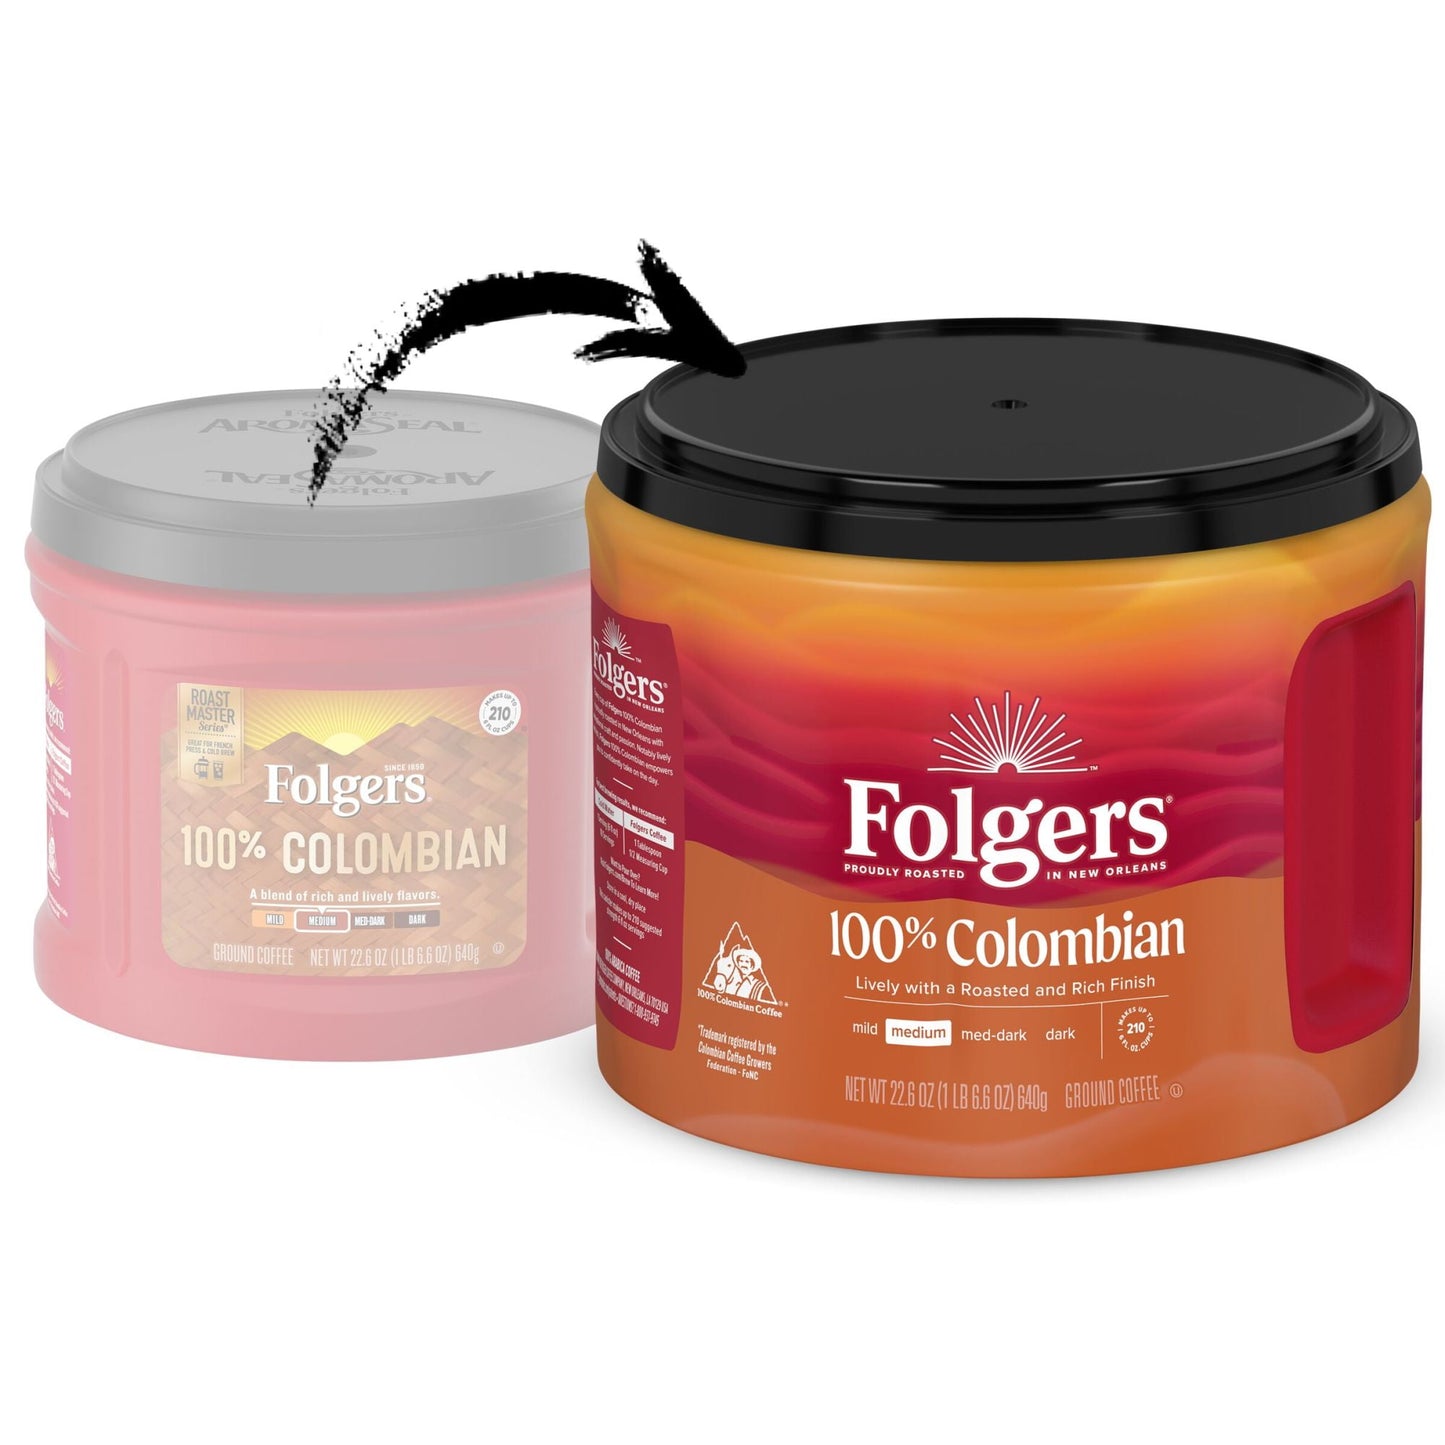 Folgers Colombian Coffee, Medium Roast Ground Coffee, 22.6 Ounce Canister